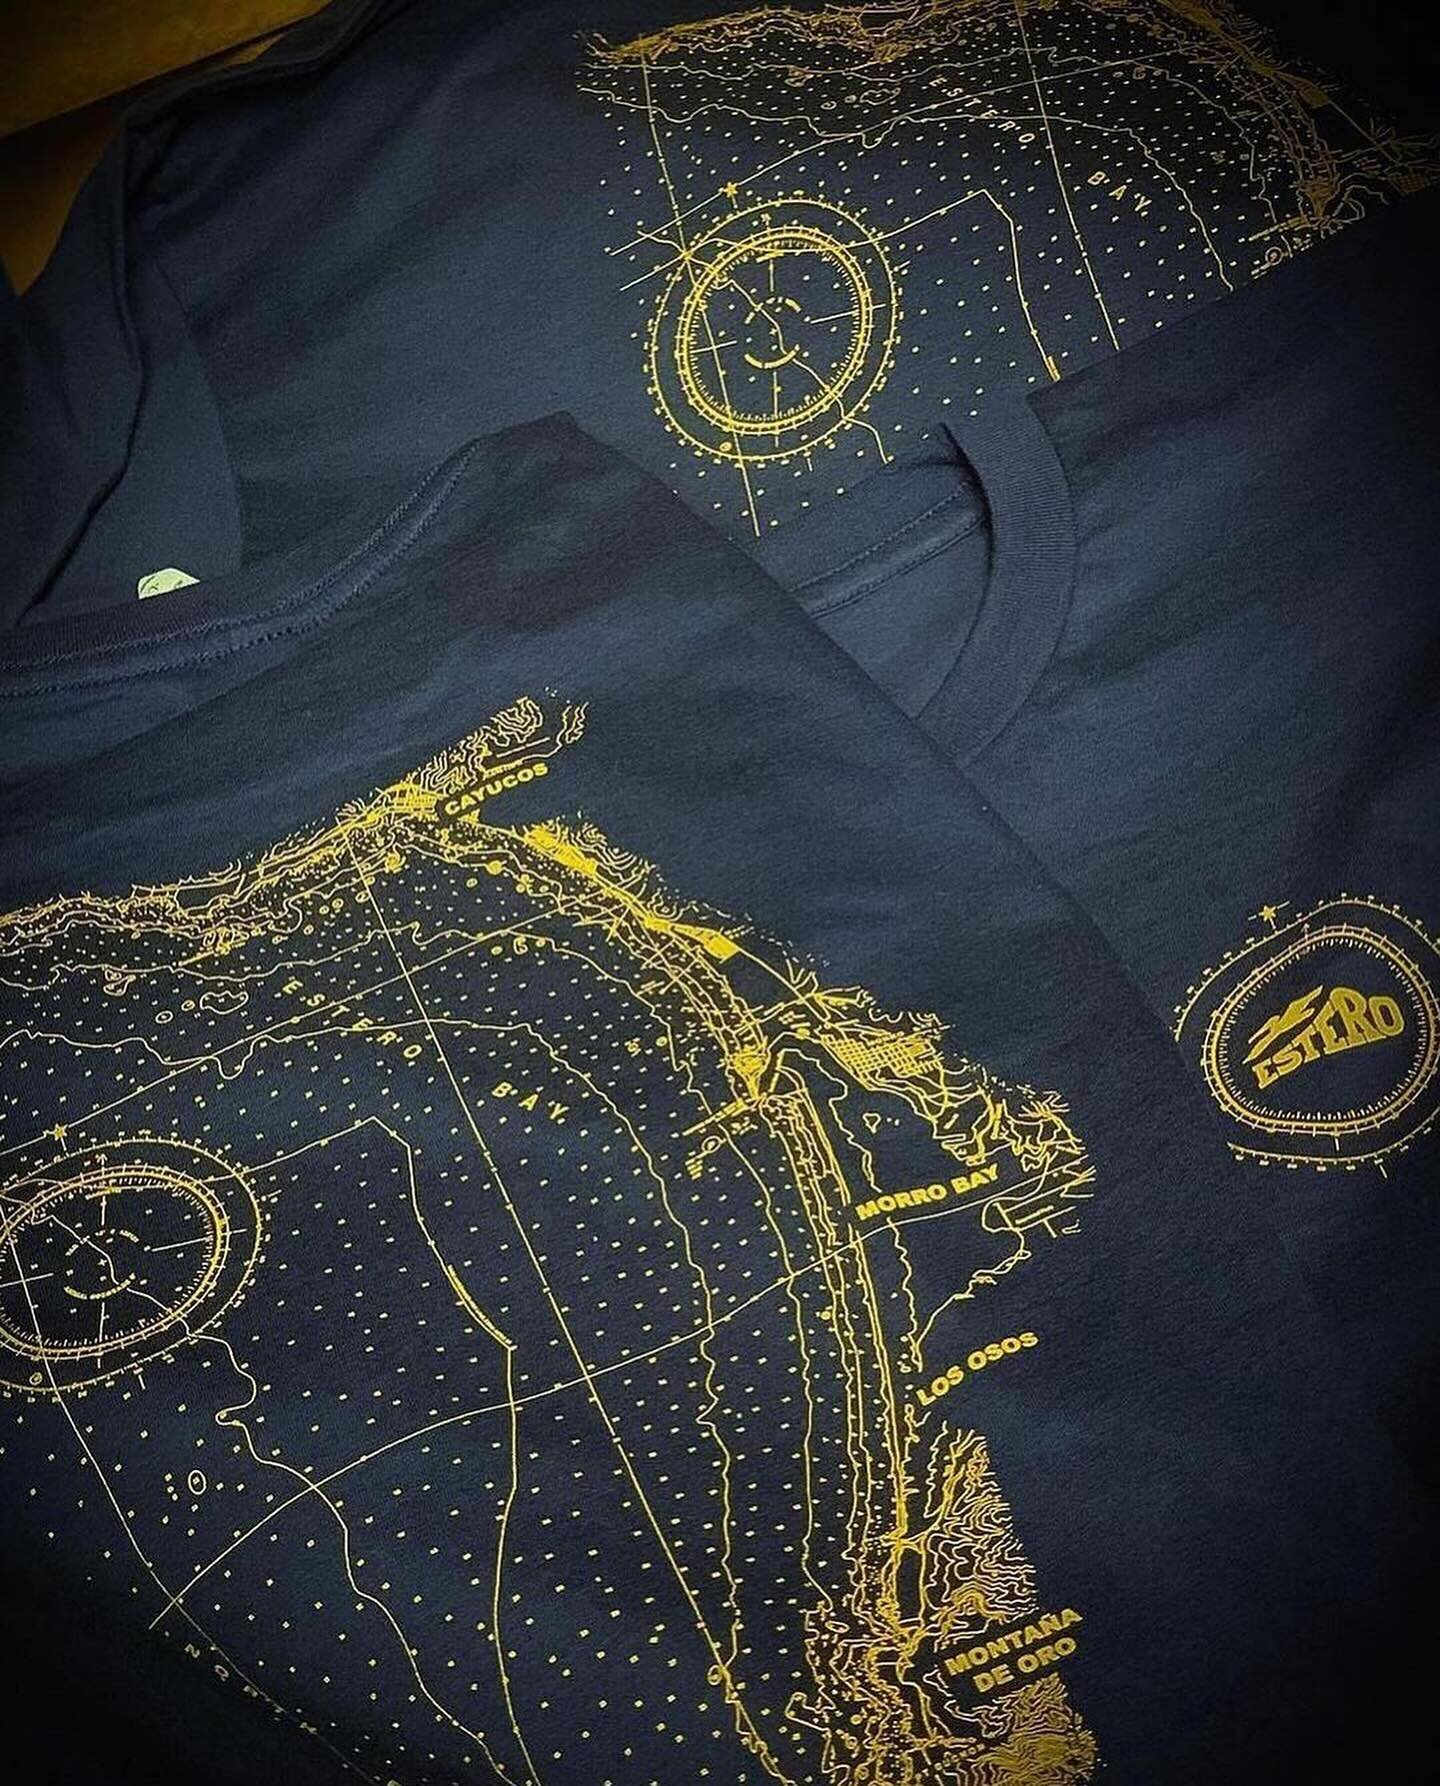 ESTERO &ldquo;Fathom&rdquo; long sleeve &bull; Gold on Navy &bull; 100% Combed Ring-Spun Cotton &bull; Soft-Washed Long Sleeve Tee &bull; Tear-out Label &bull;
Front: Maritime Compass Rose
Back: Local Nautical chart of Estero Bay &bull; (store link i